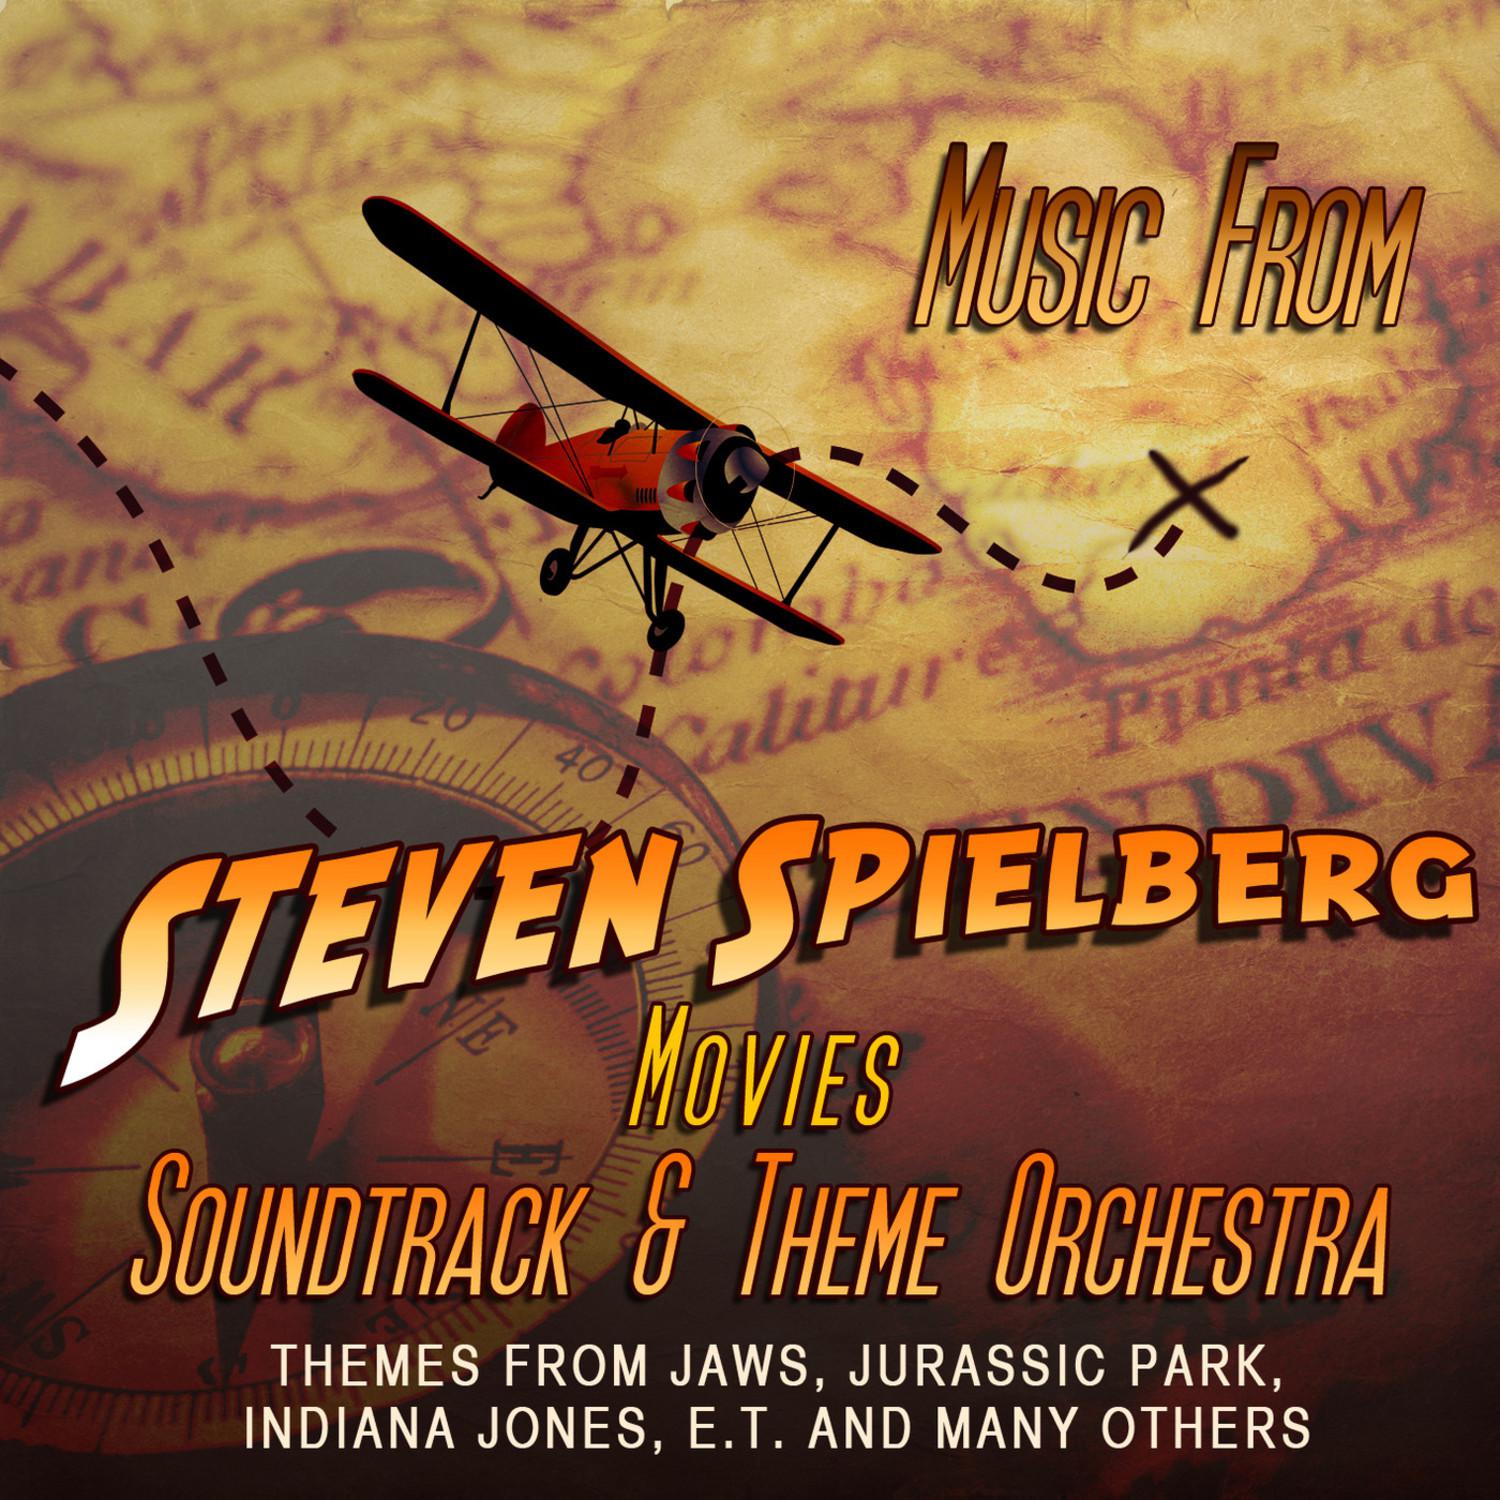 Music From Steven Spielberg Movies